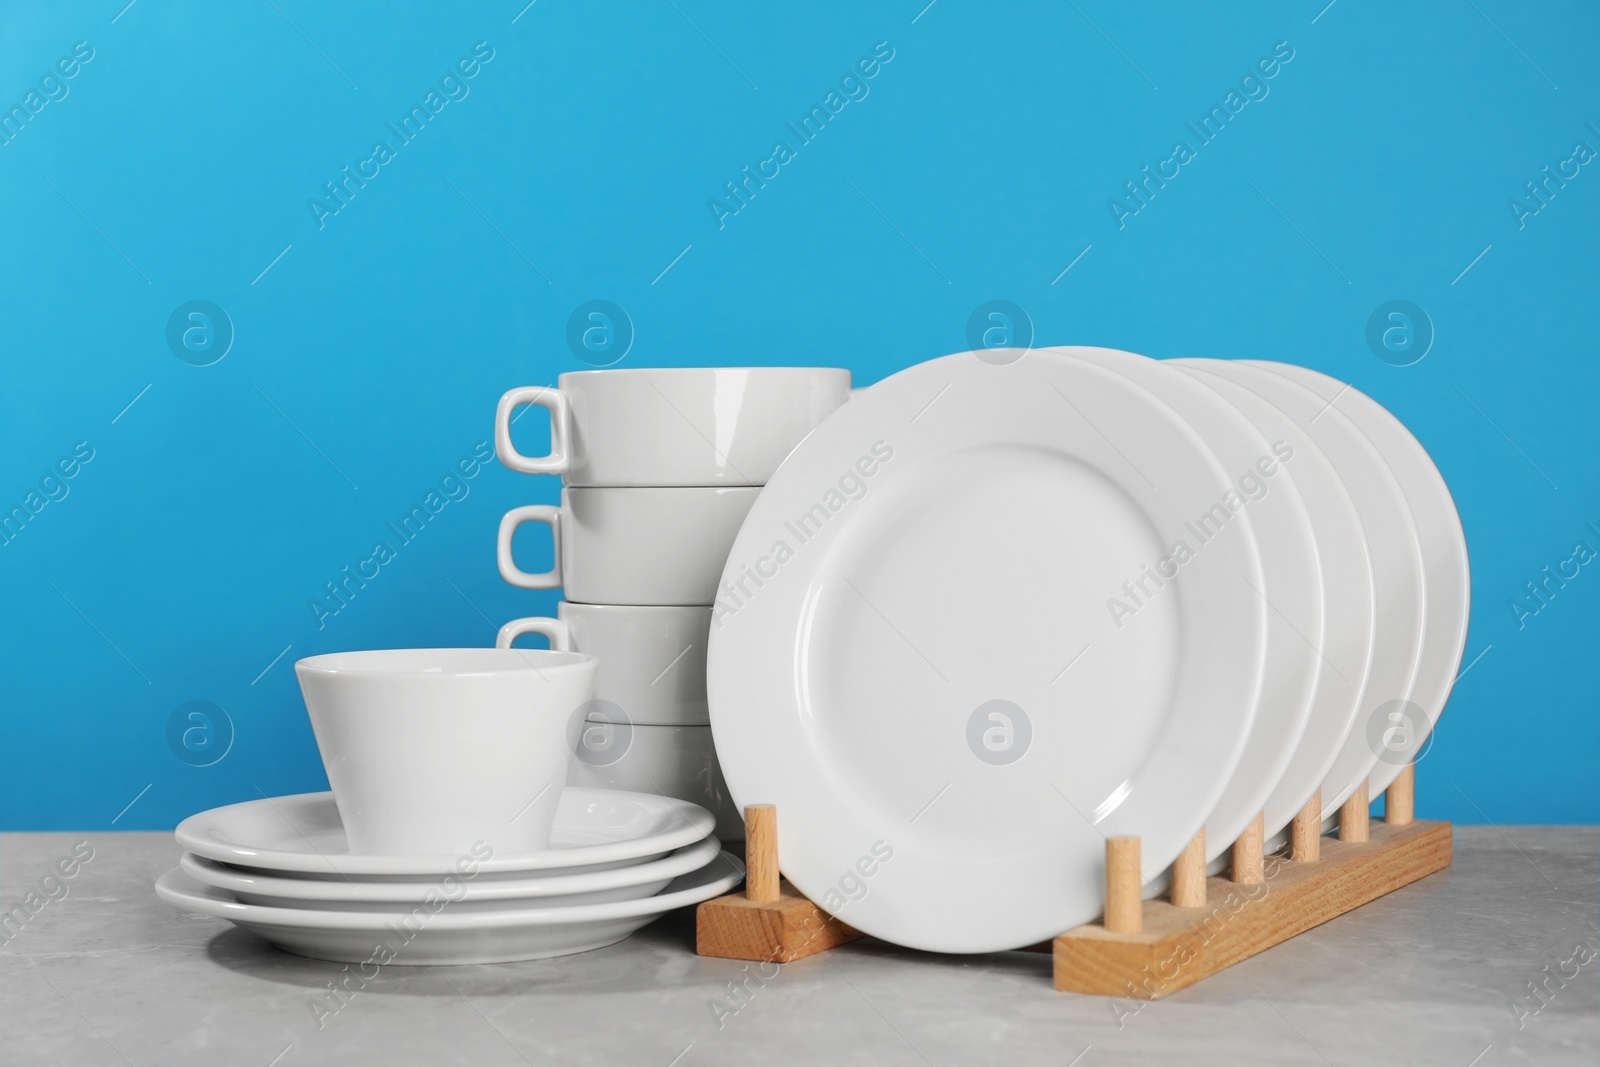 Photo of Set of clean tableware on grey table against light blue background